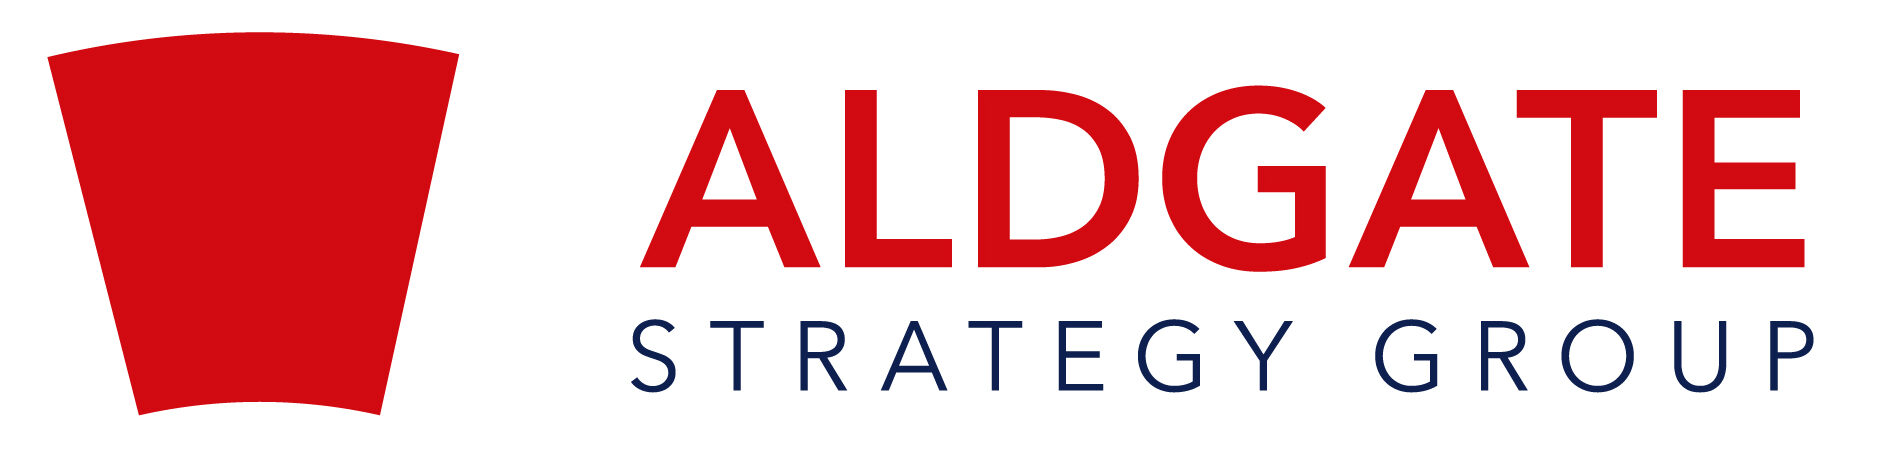 Aldgate Strategy Group